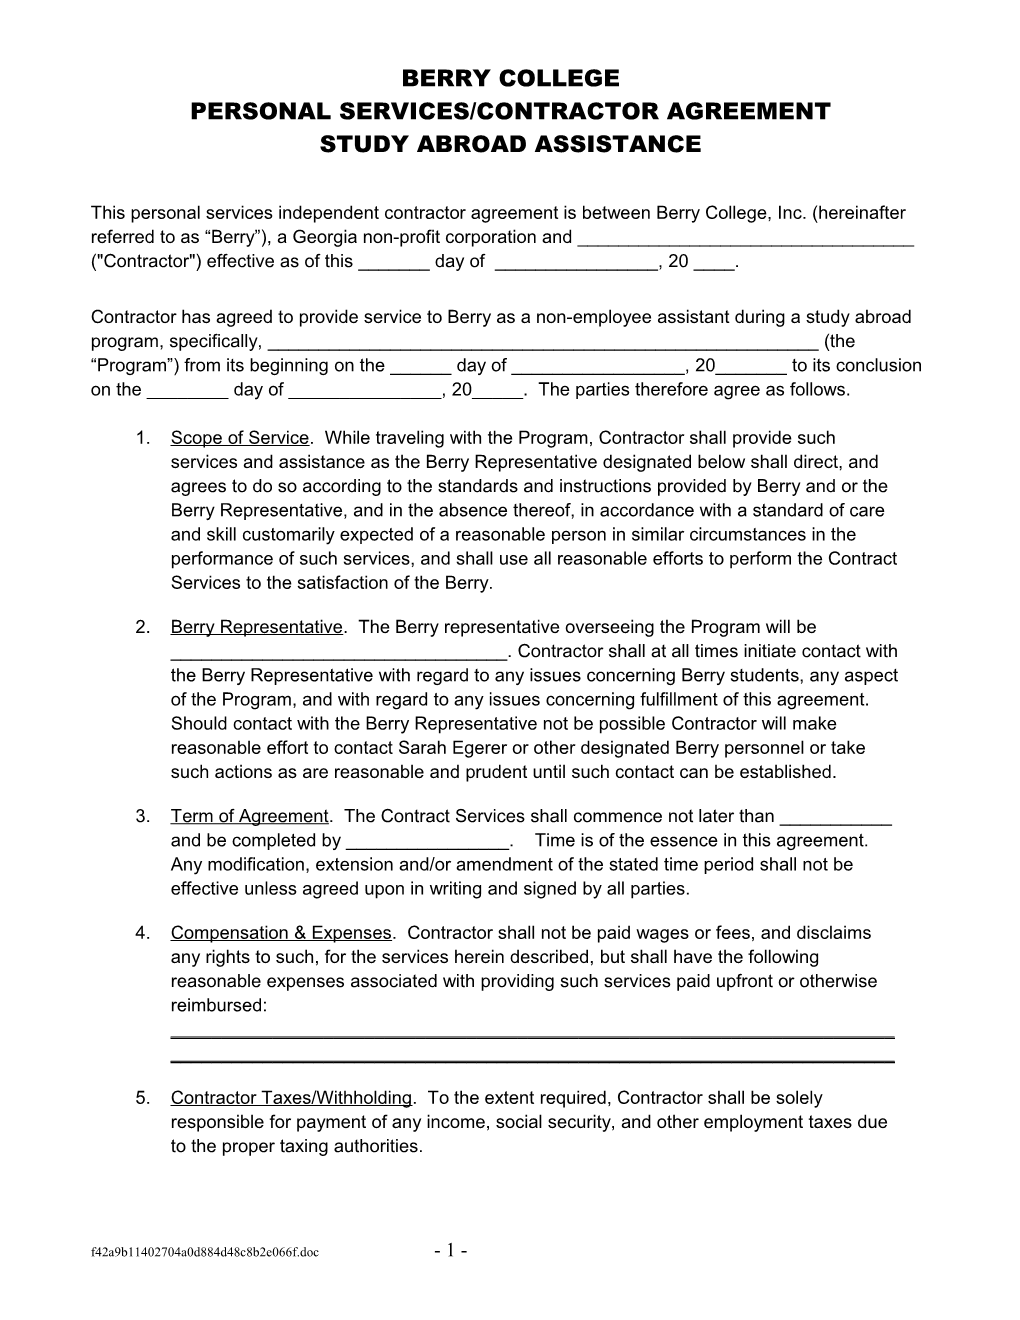 Independent Contractor Agreement s2